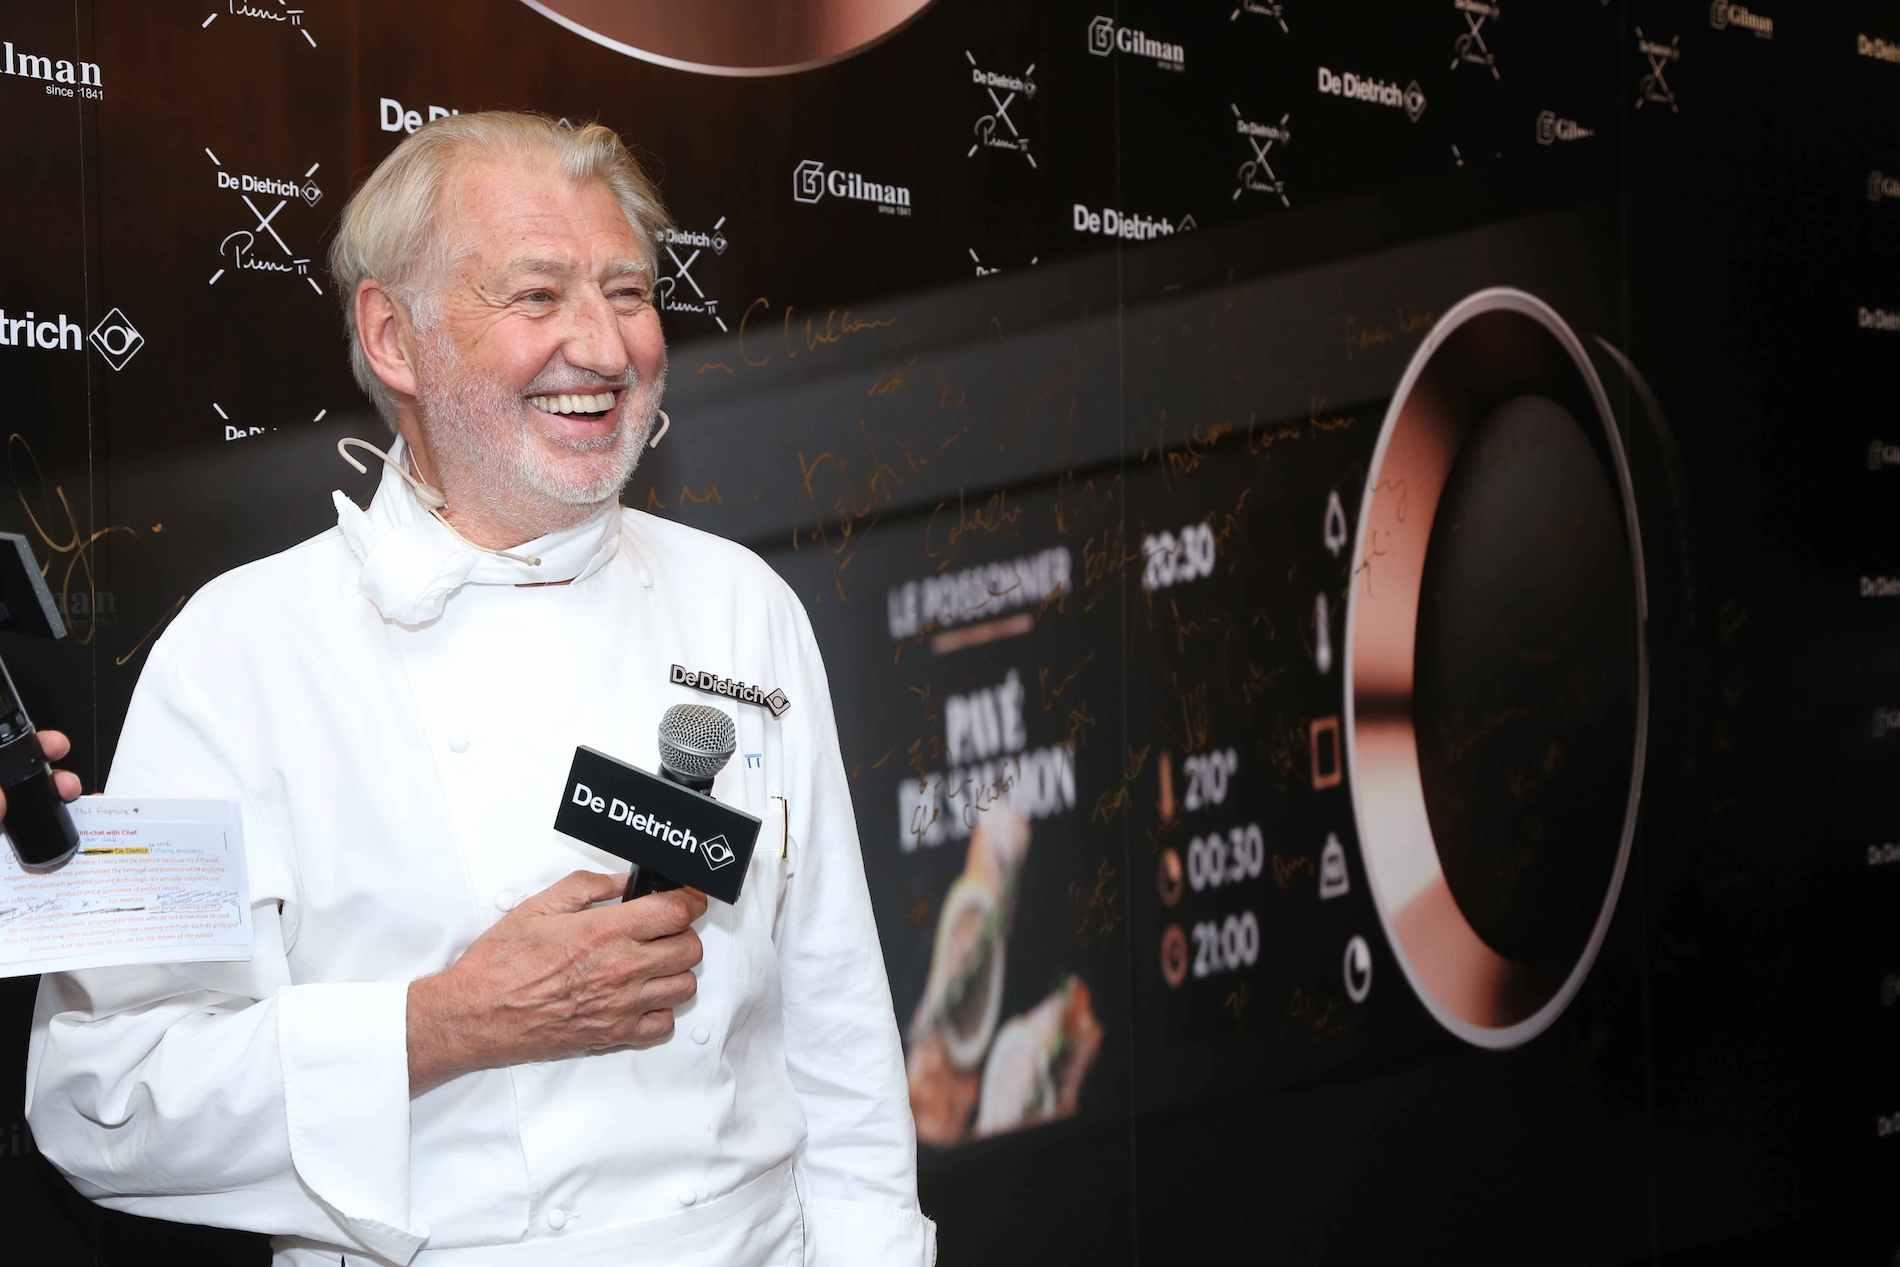 Inside The Kitchen With Chef Pierre Gagnaire